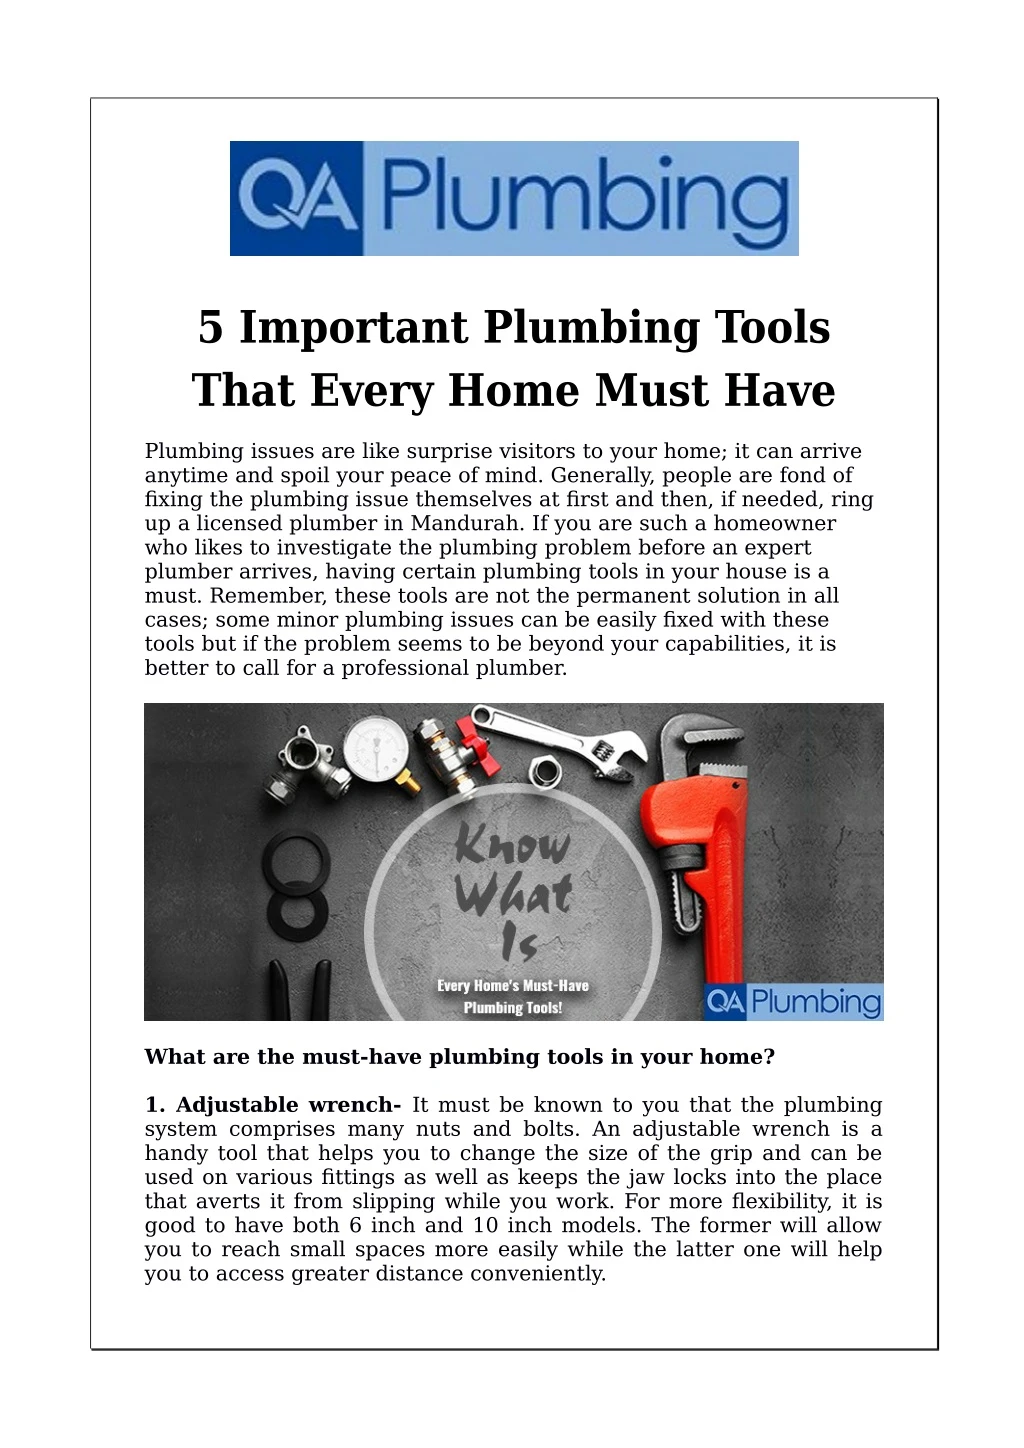 5 important plumbing tools that every home must